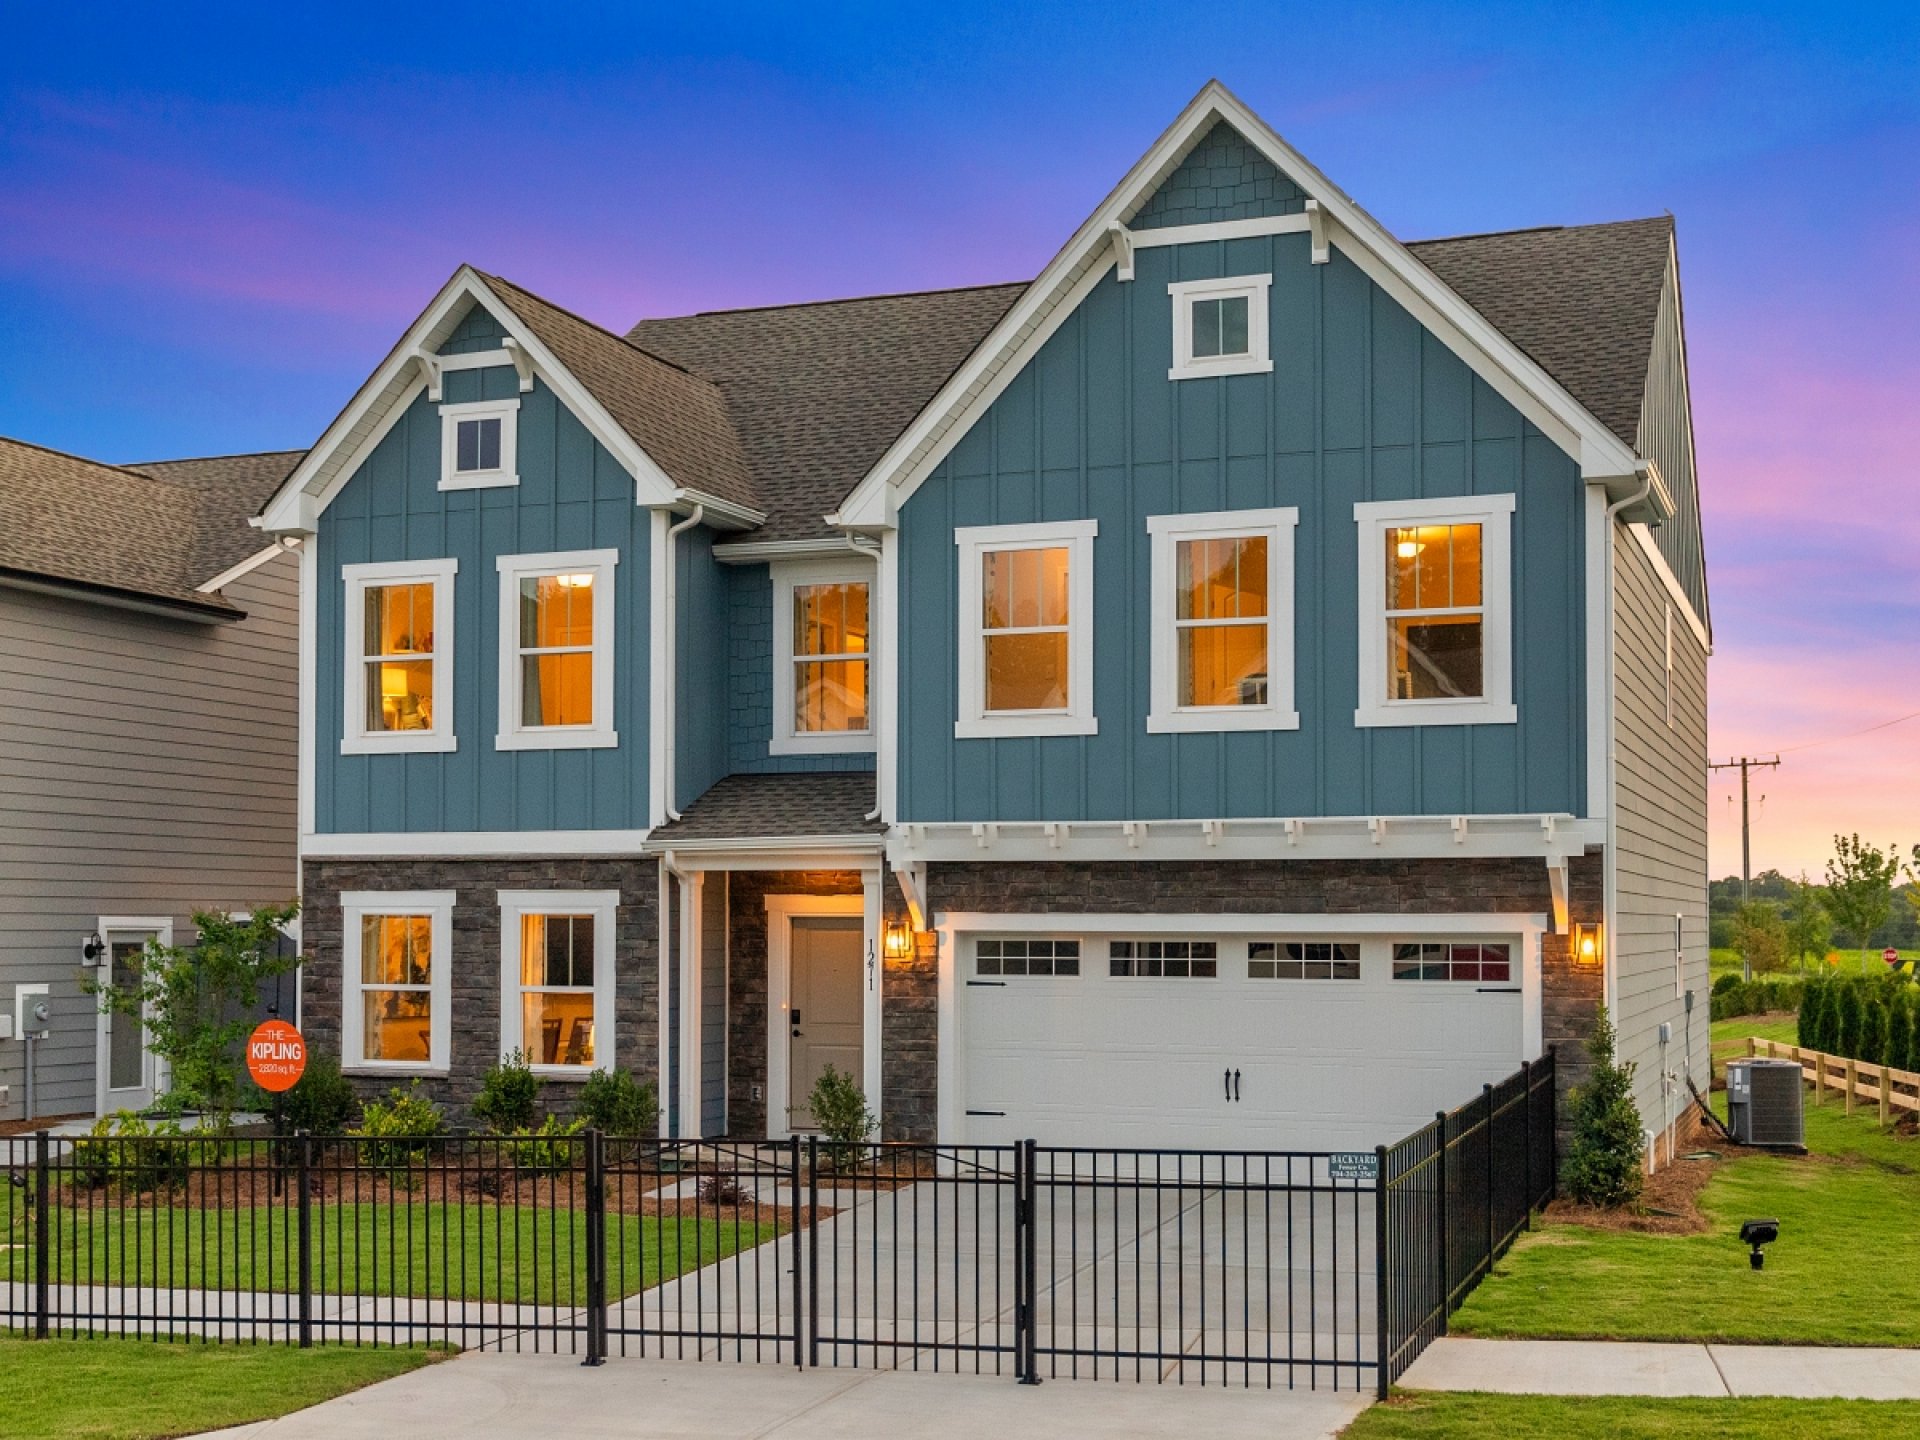 New Homes For Sale in Monroe, NC | True Homes